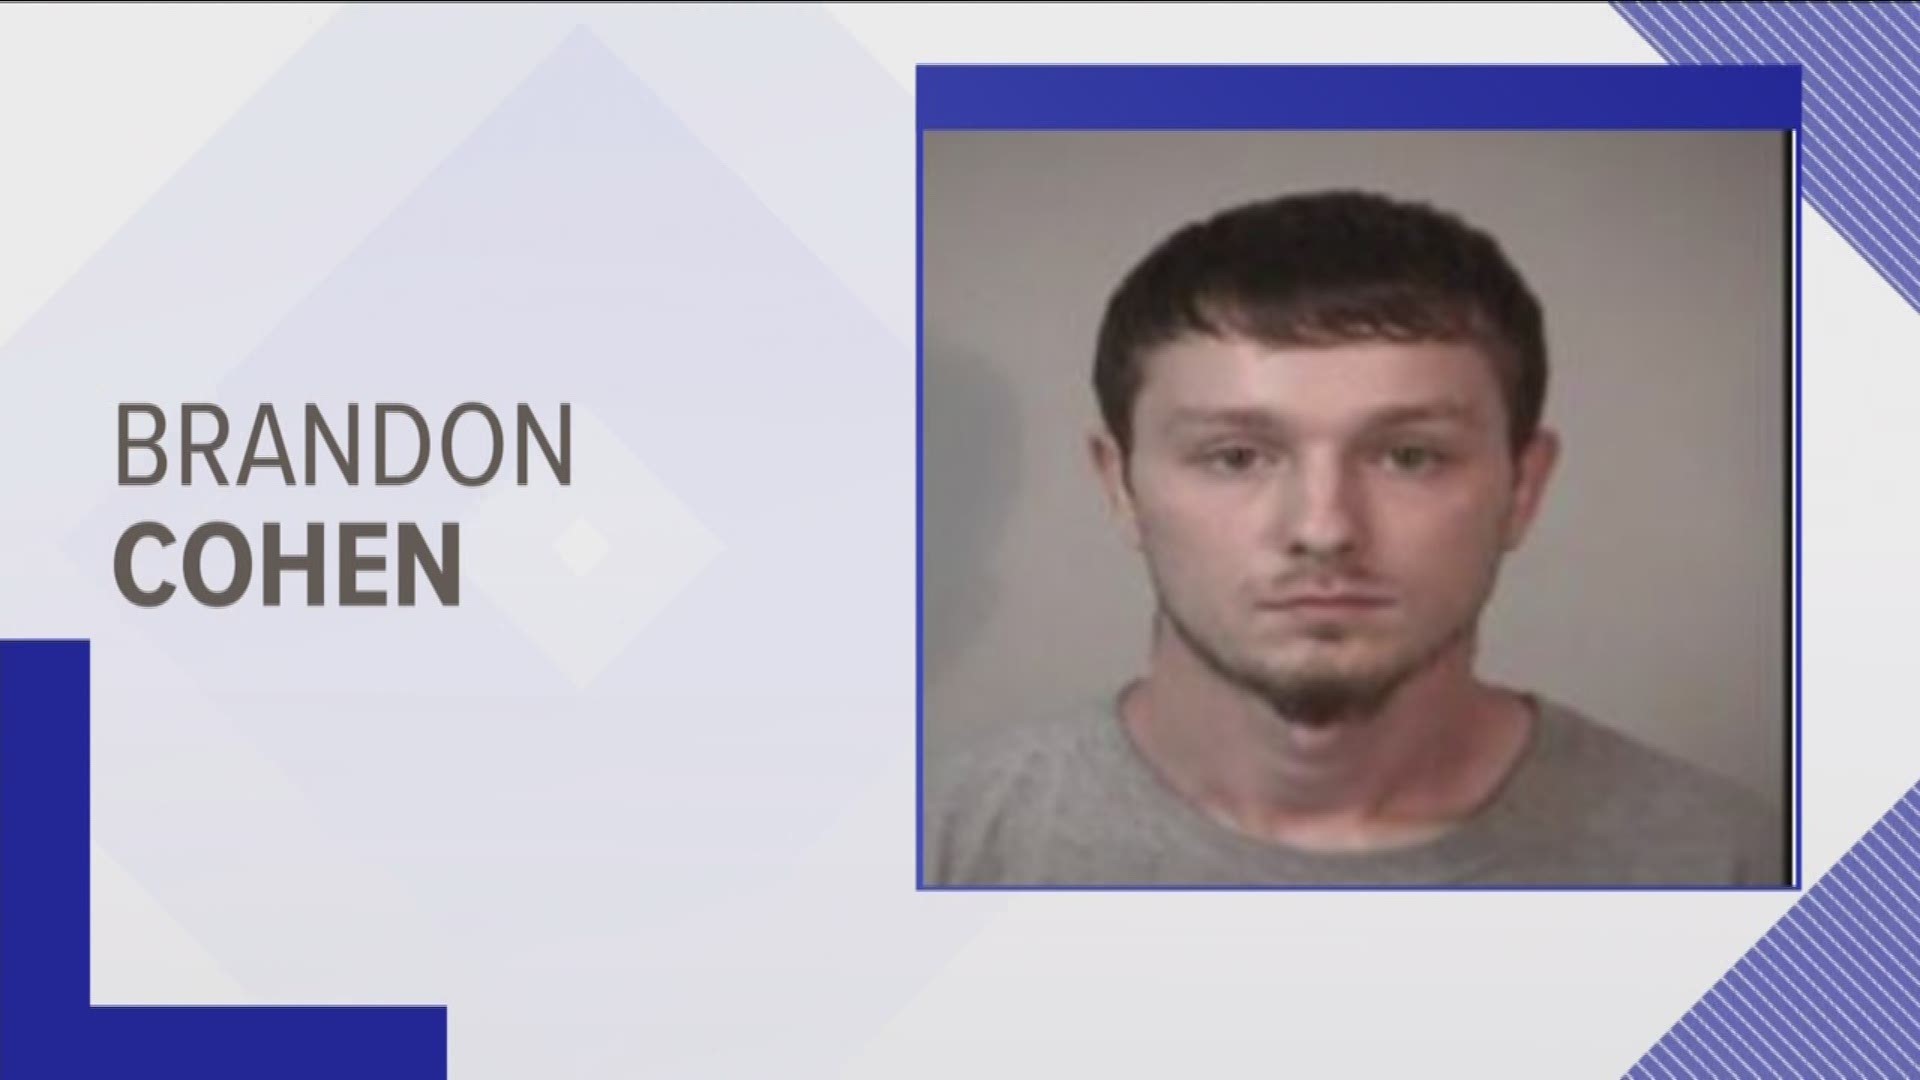 A Stafford County man is behind bars after police say he shot and killed his 78-year-old grandfather. 
Around 8:25 a.m. Sunday, Stafford County deputies received 911 call from 24-year-old Brandon Cohen, telling them he shot and killed his grandfather.